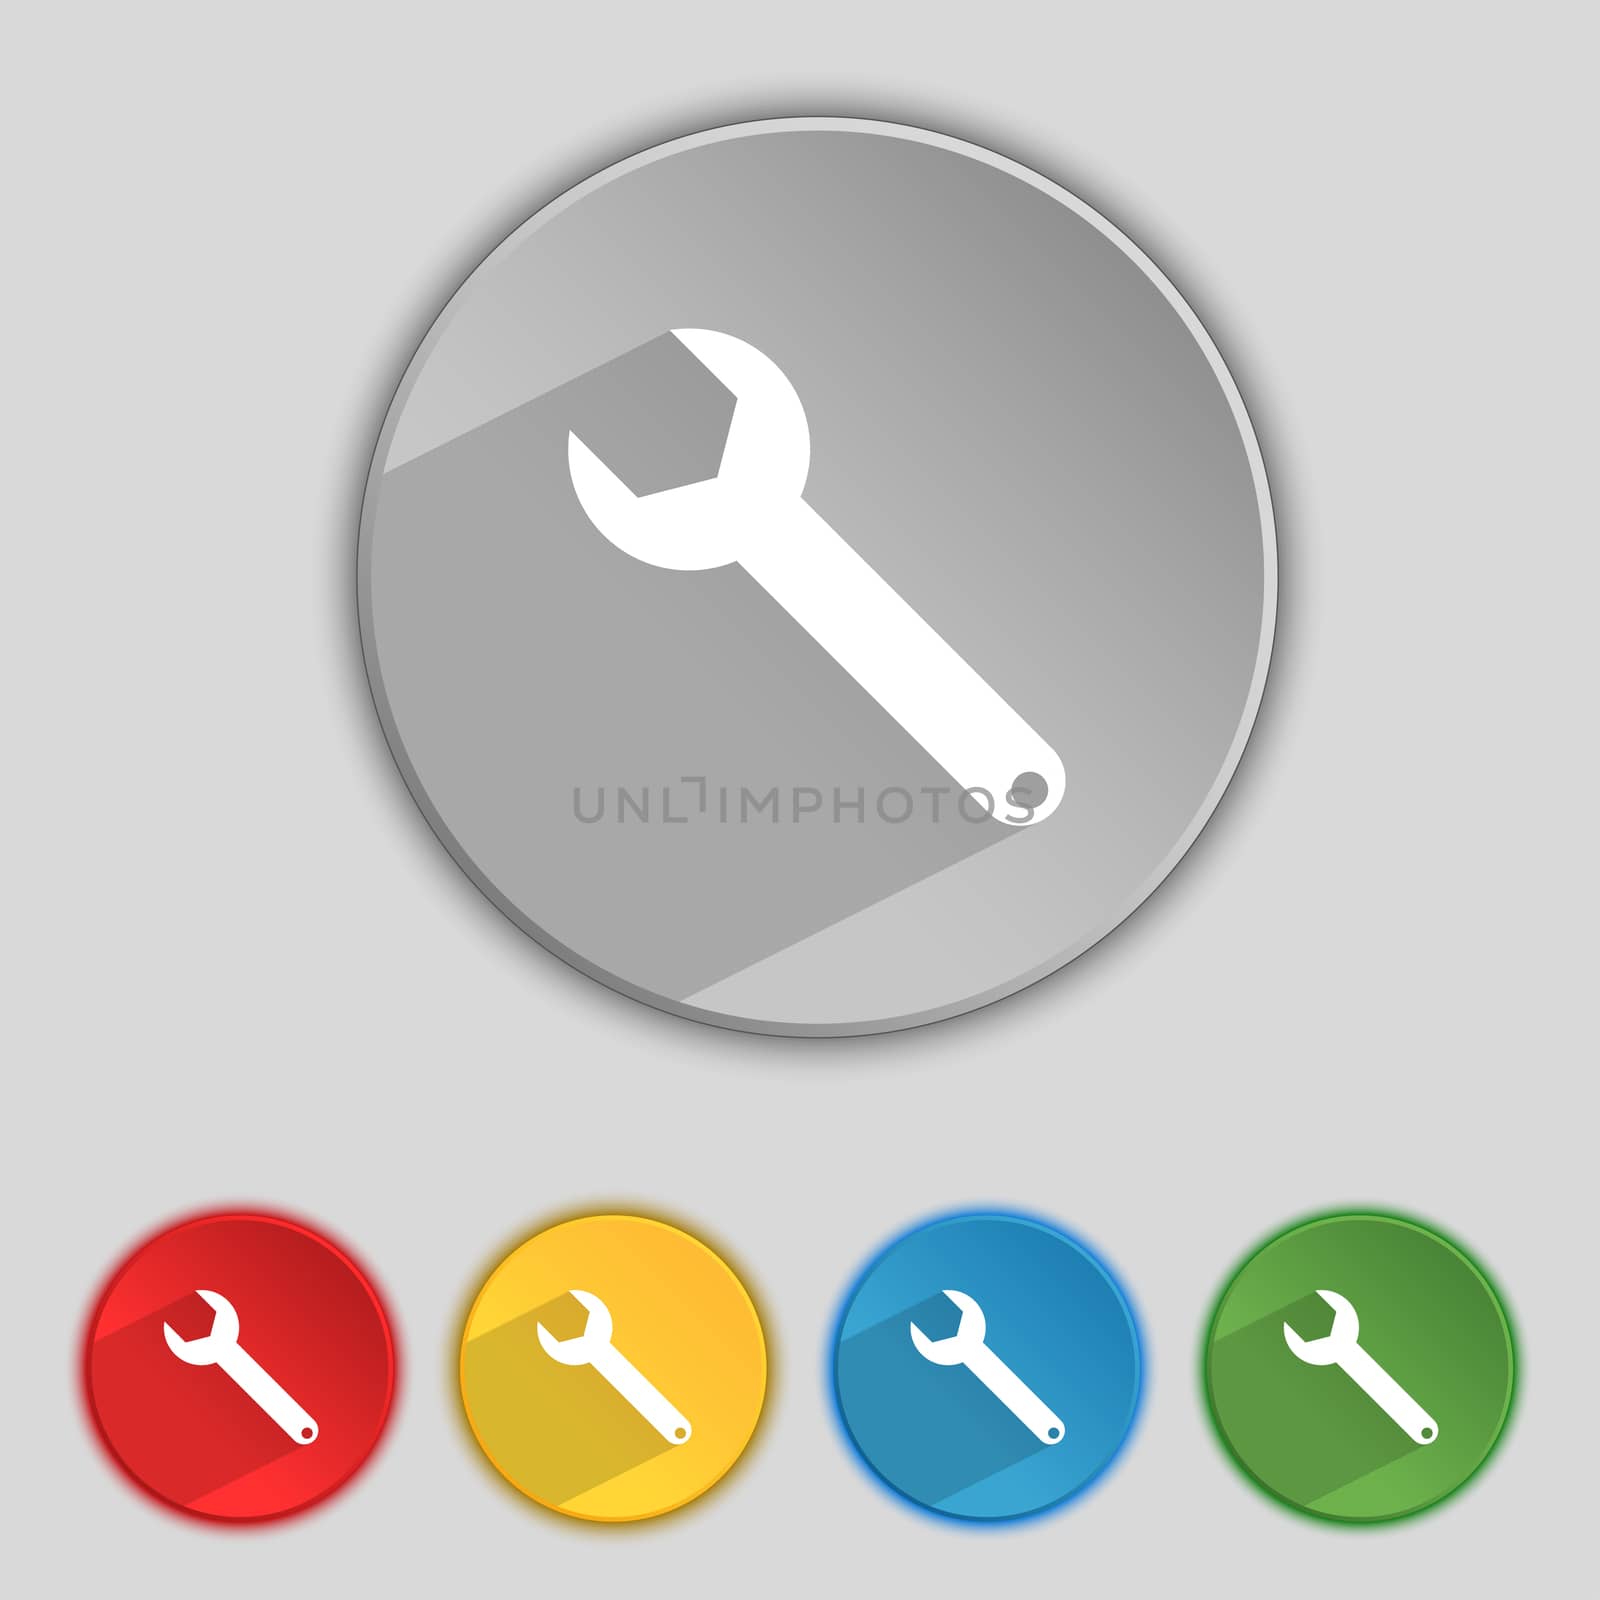 Wrench key sign icon. Service tool symbol. Set of colored buttons. illustration